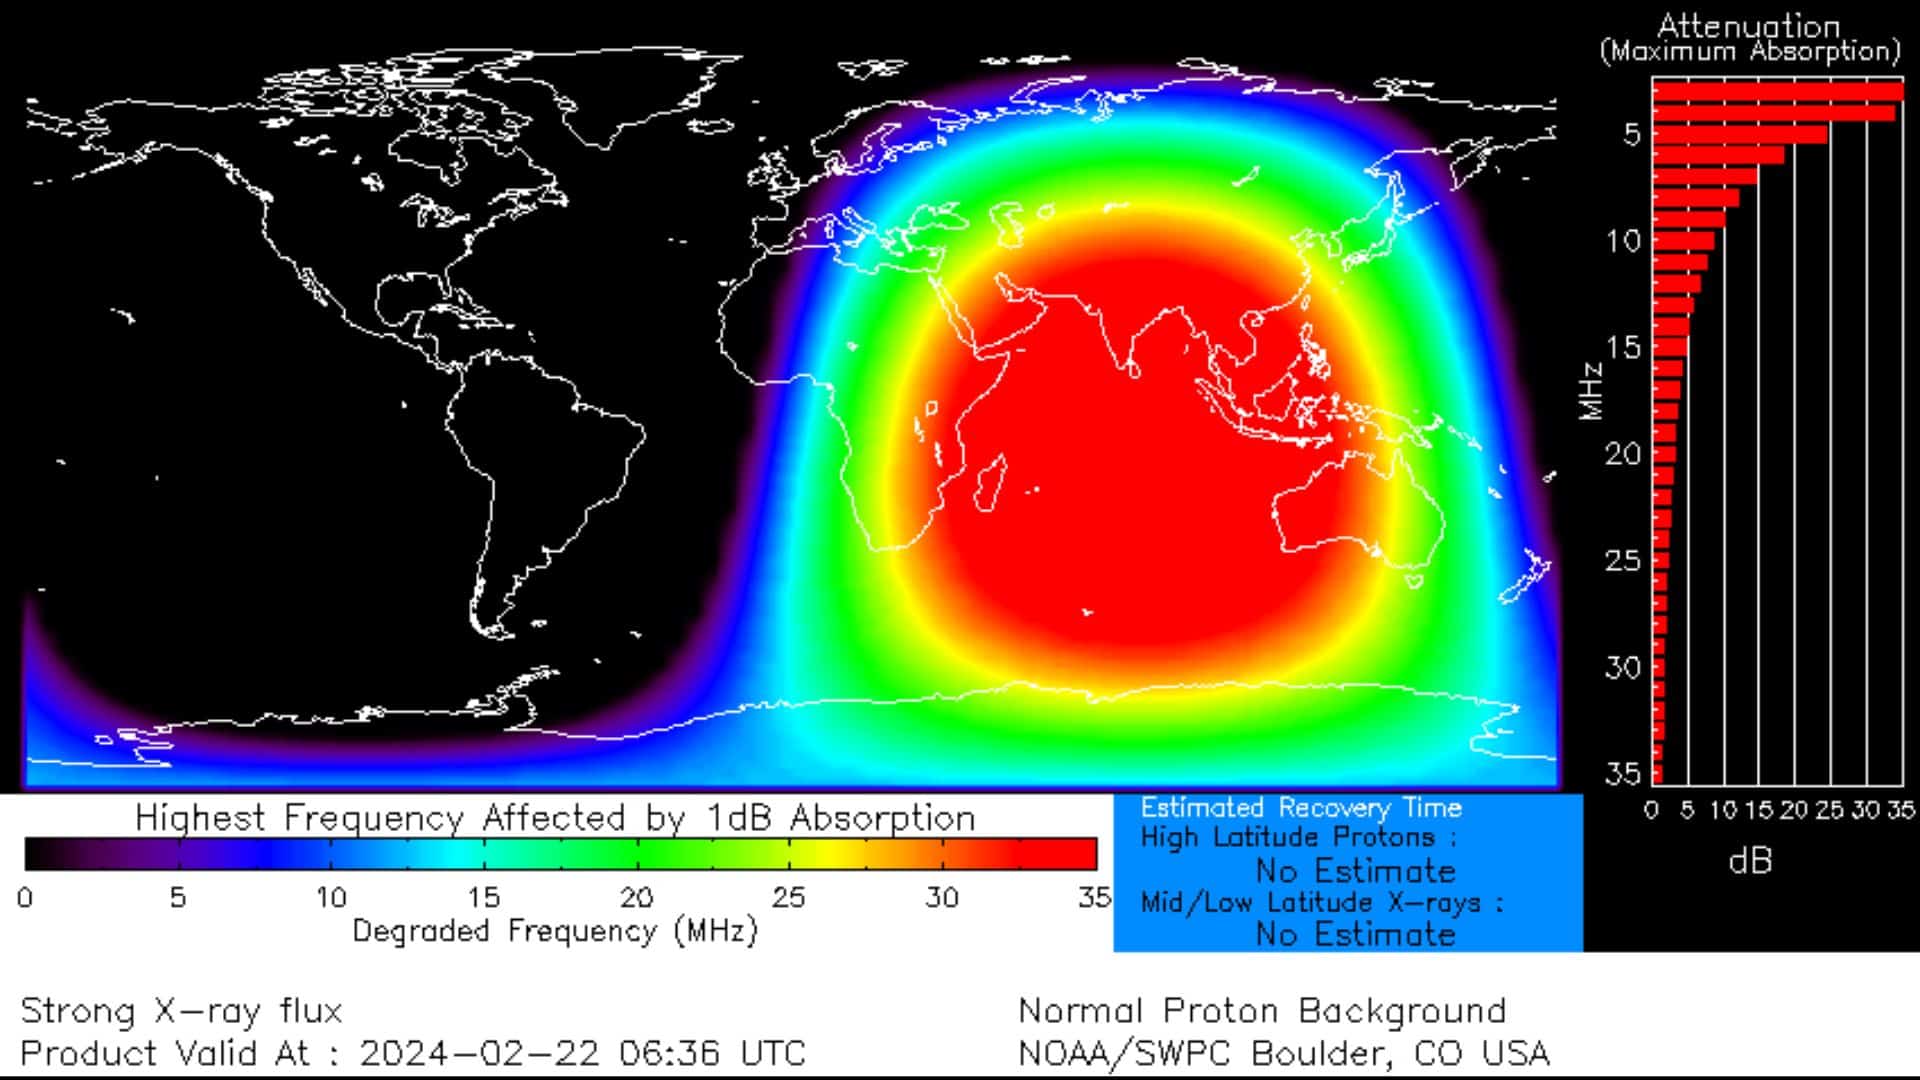 Affected areas due to strong X-flare on February 22, 2024